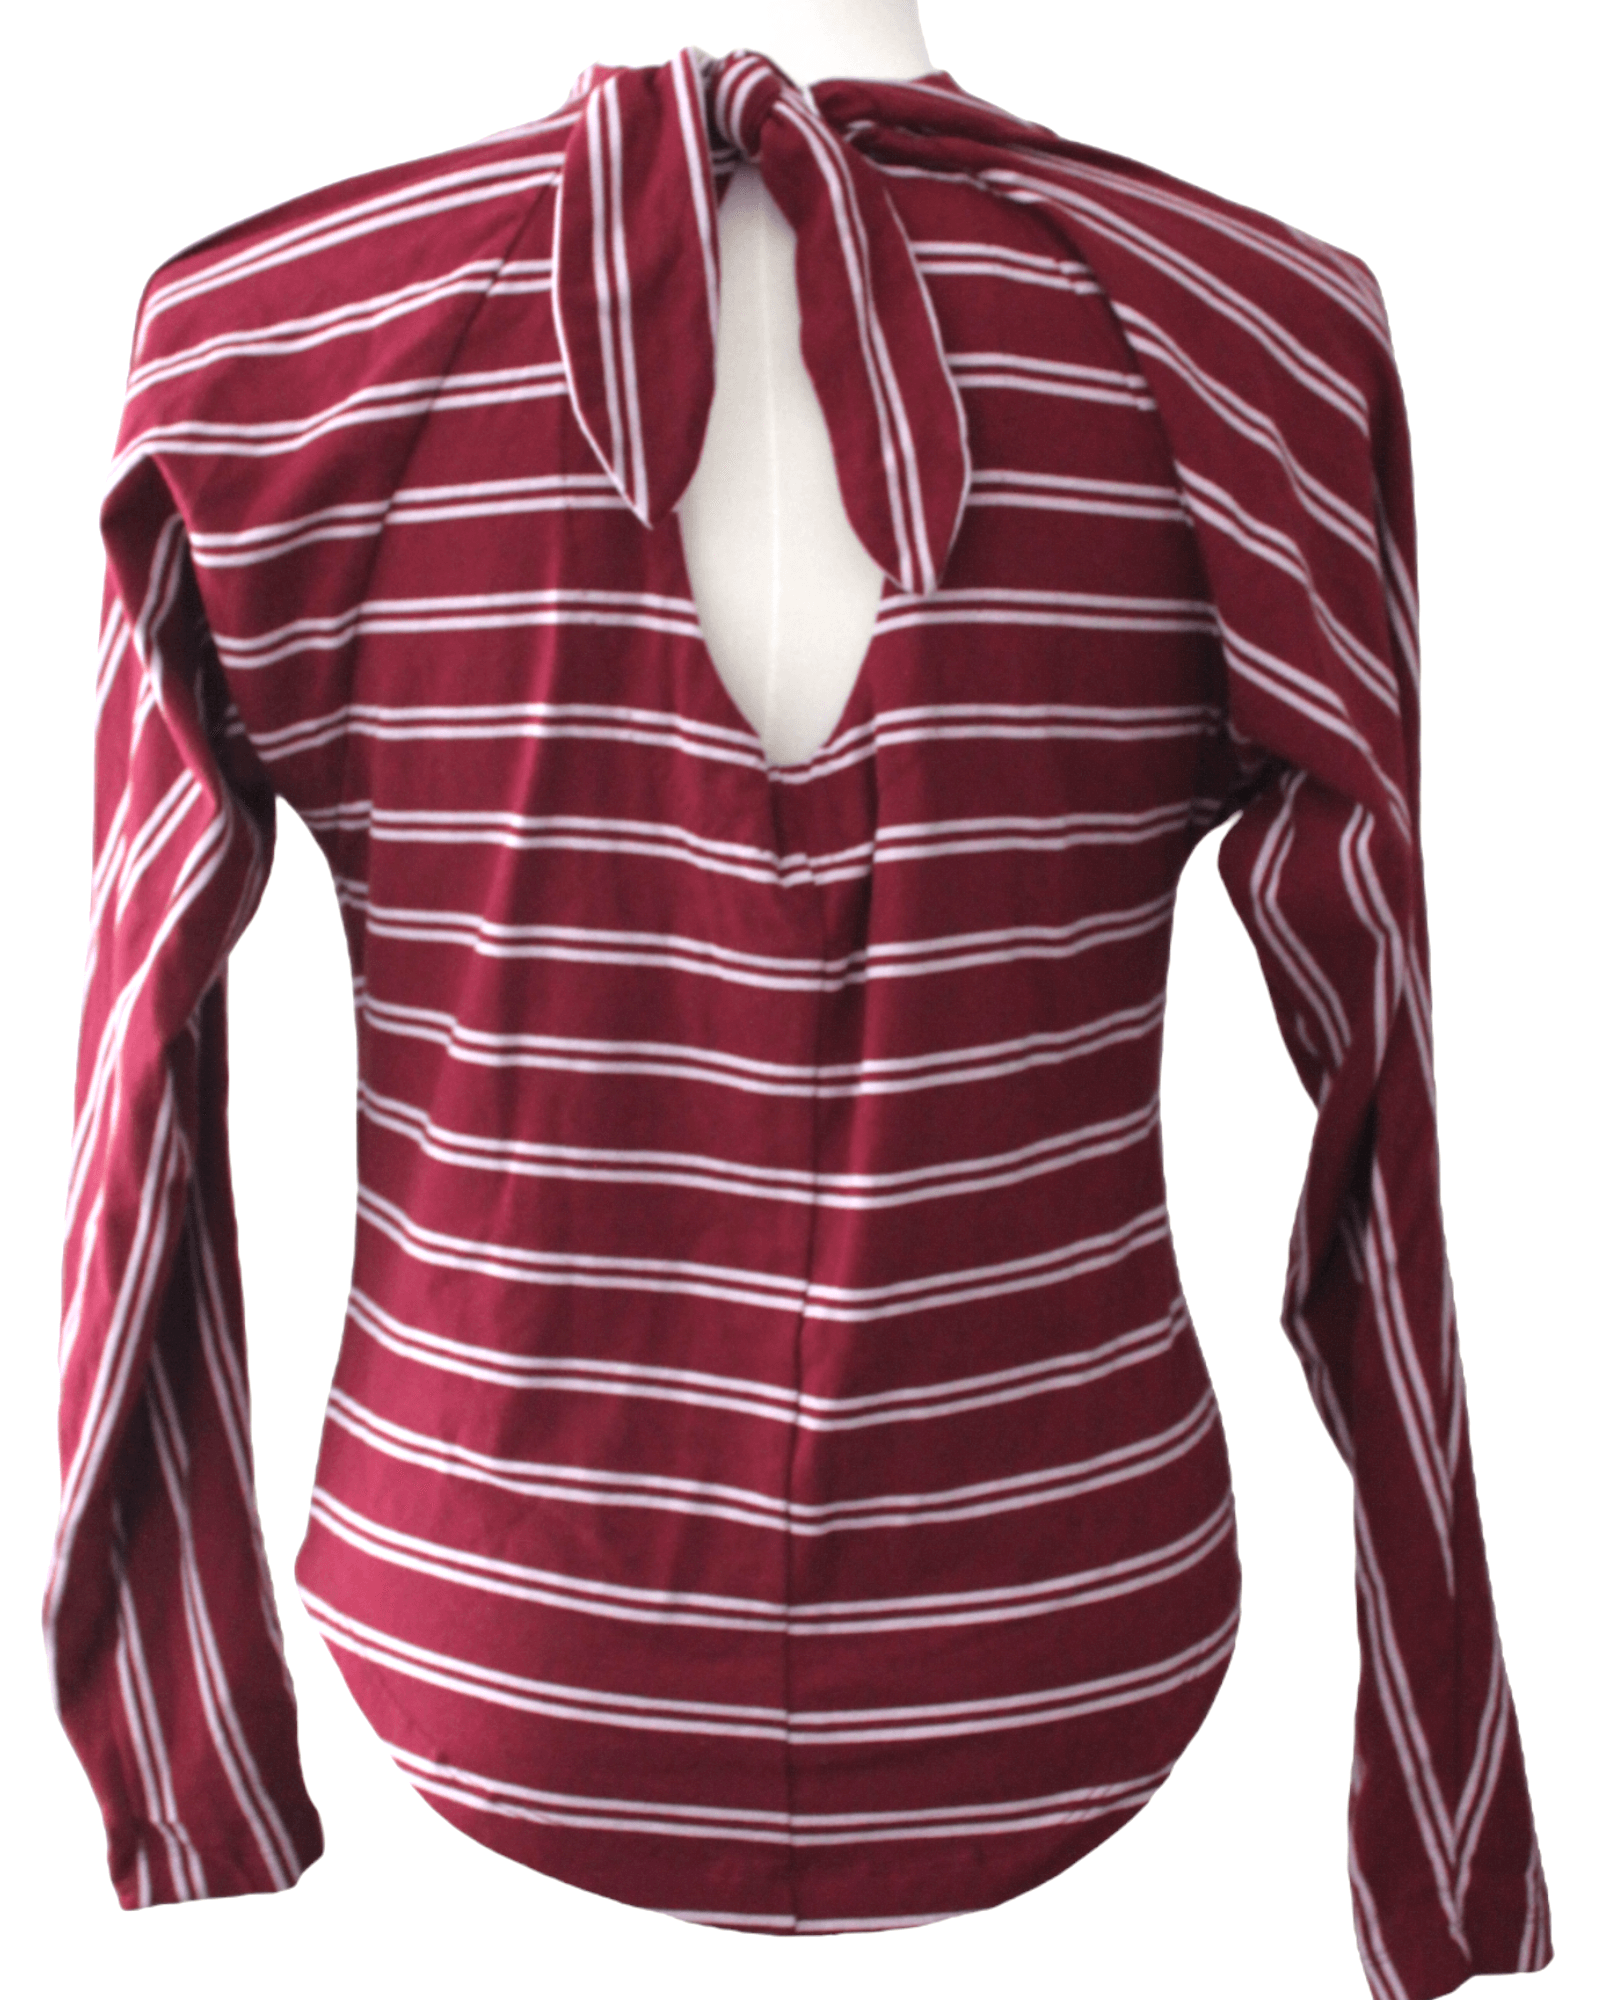 Soft Summer FREE PEOPLE red and white stripe tie back top